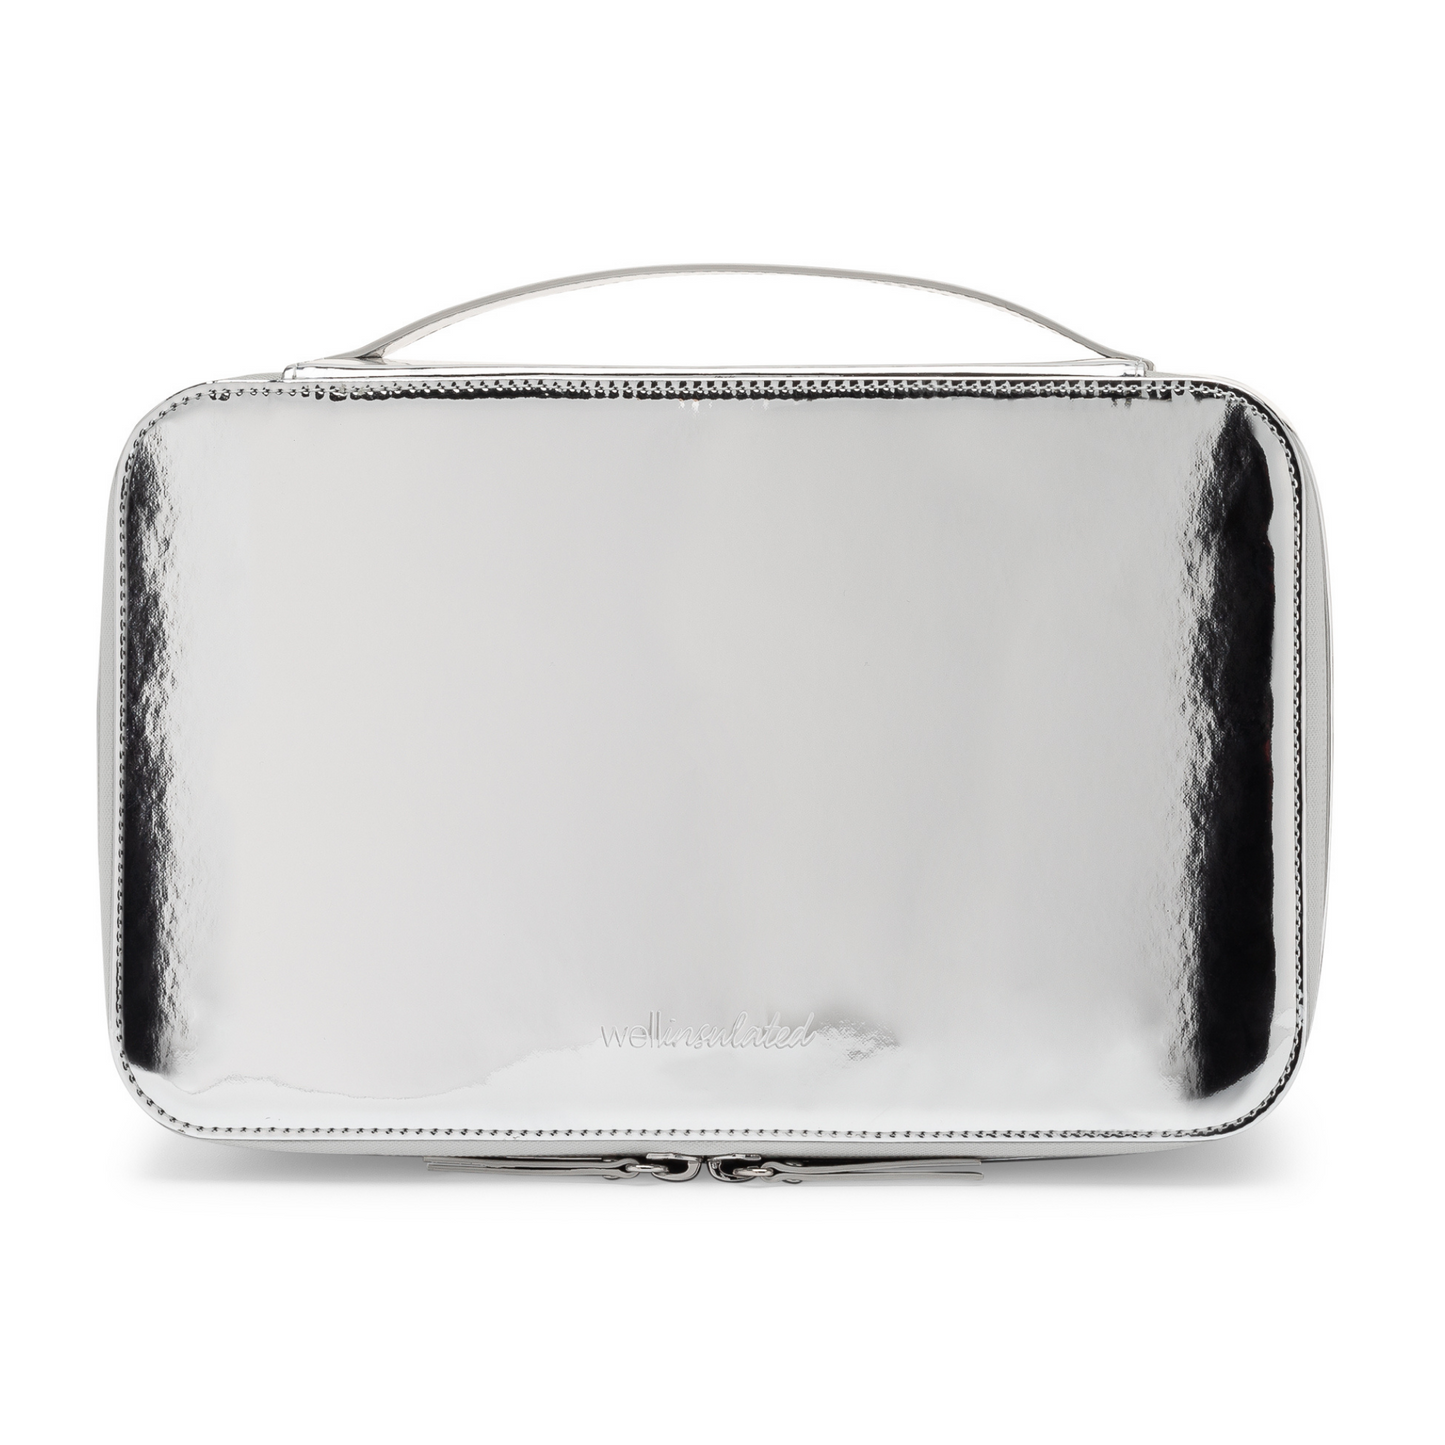 Upright front view of the Well Insulated Performance Travel Case. The handle on the top of the case is visible. The case is metallic silver with the Well Insulated logo embossed in the surface. 